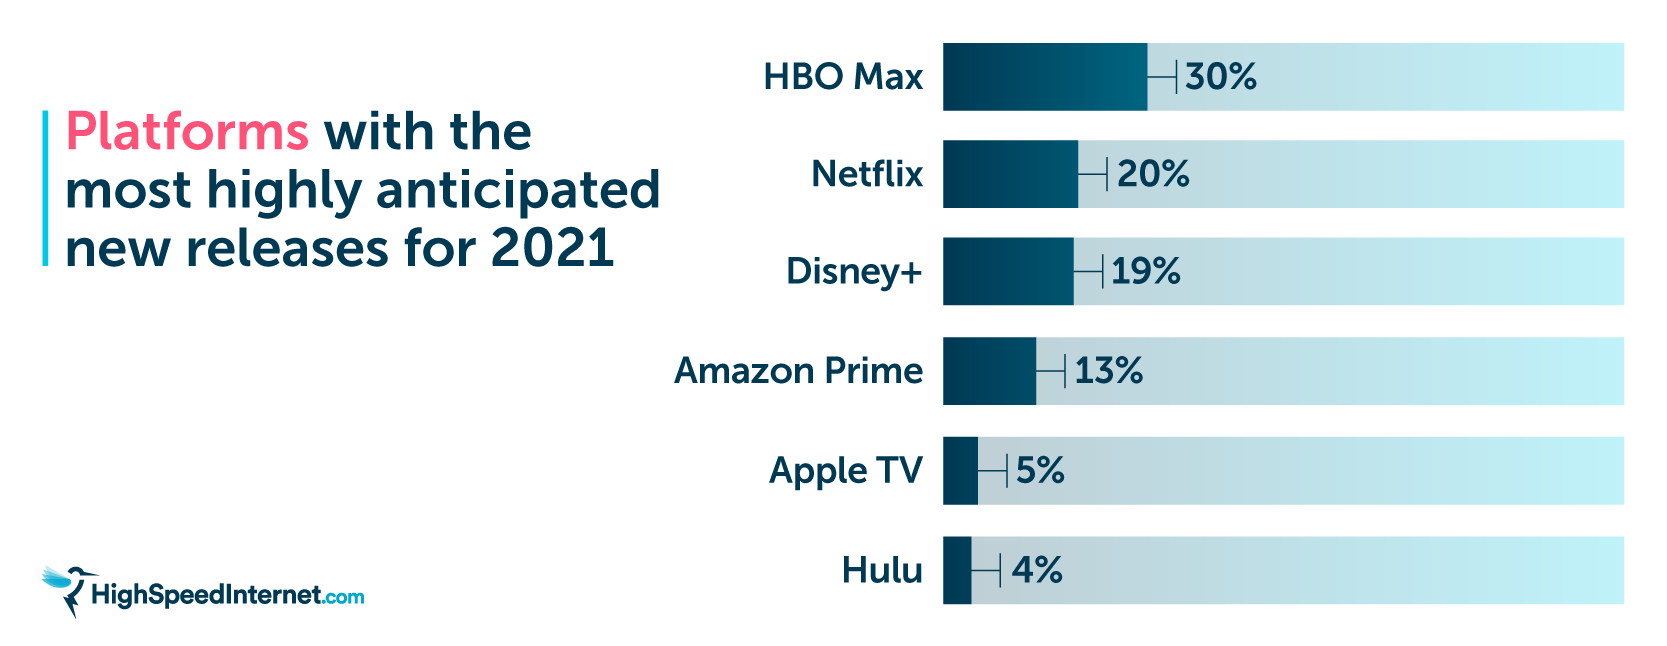 HBO Max Is the Latest Streaming Service to Roll Out a Price Hike